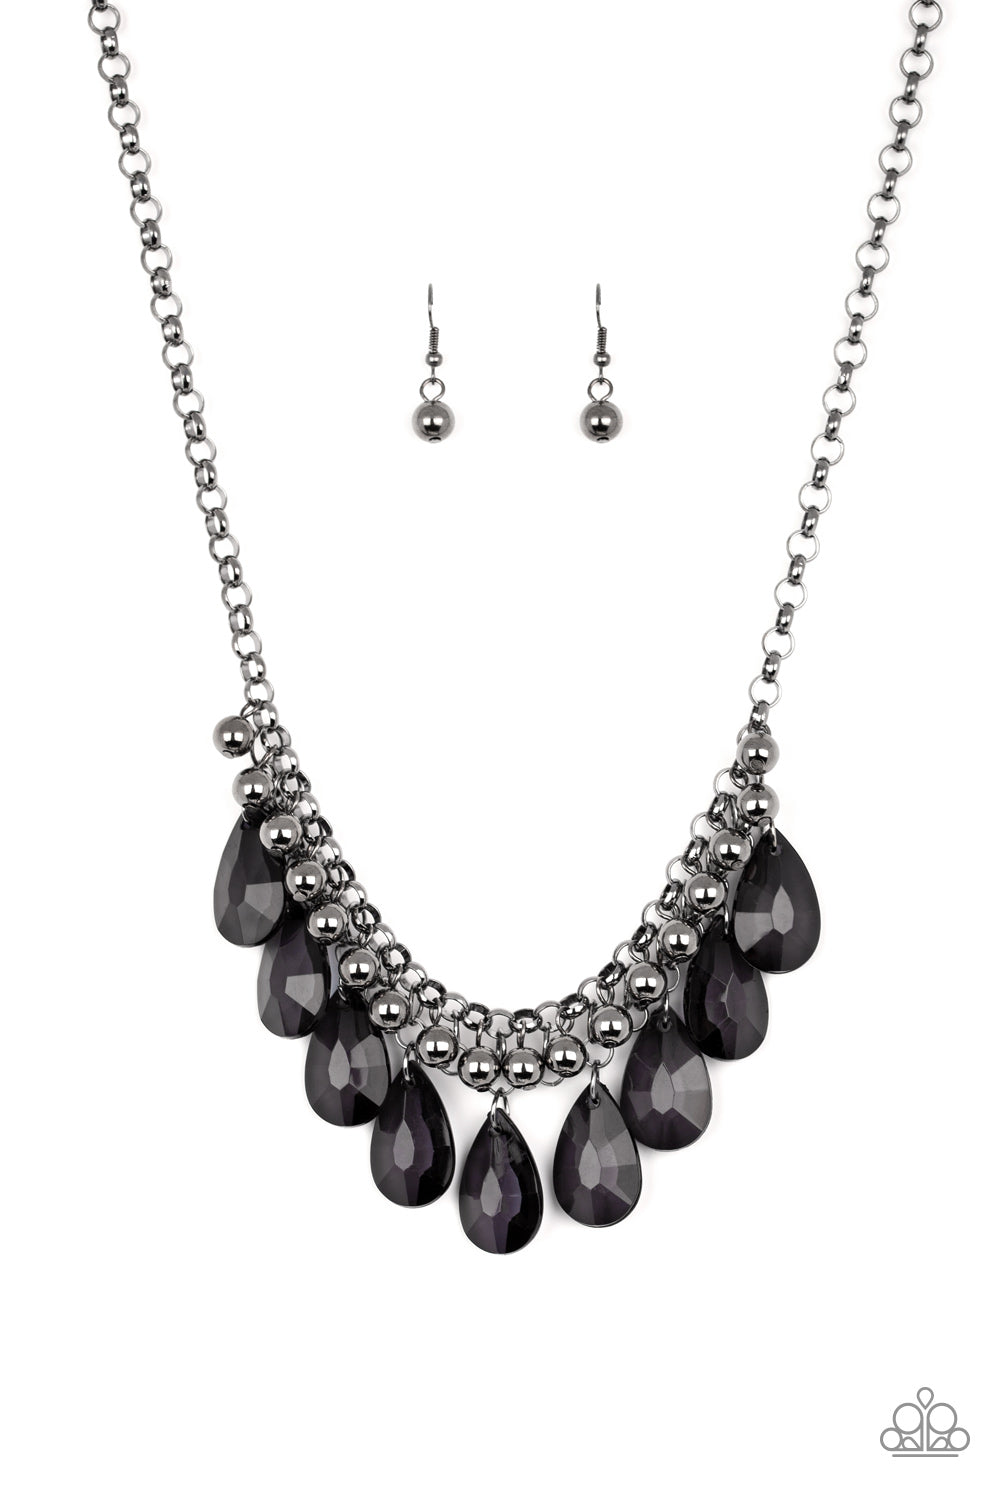 Fashionista Flair - Black Fashion Necklace - Paparazzi Accessories - A row of glistening gunmetal beads gives way to glassy black teardrops, creating a bold tone on tone fringe below the collar. Features an adjustable clasp closure. Sold as one individual necklace.